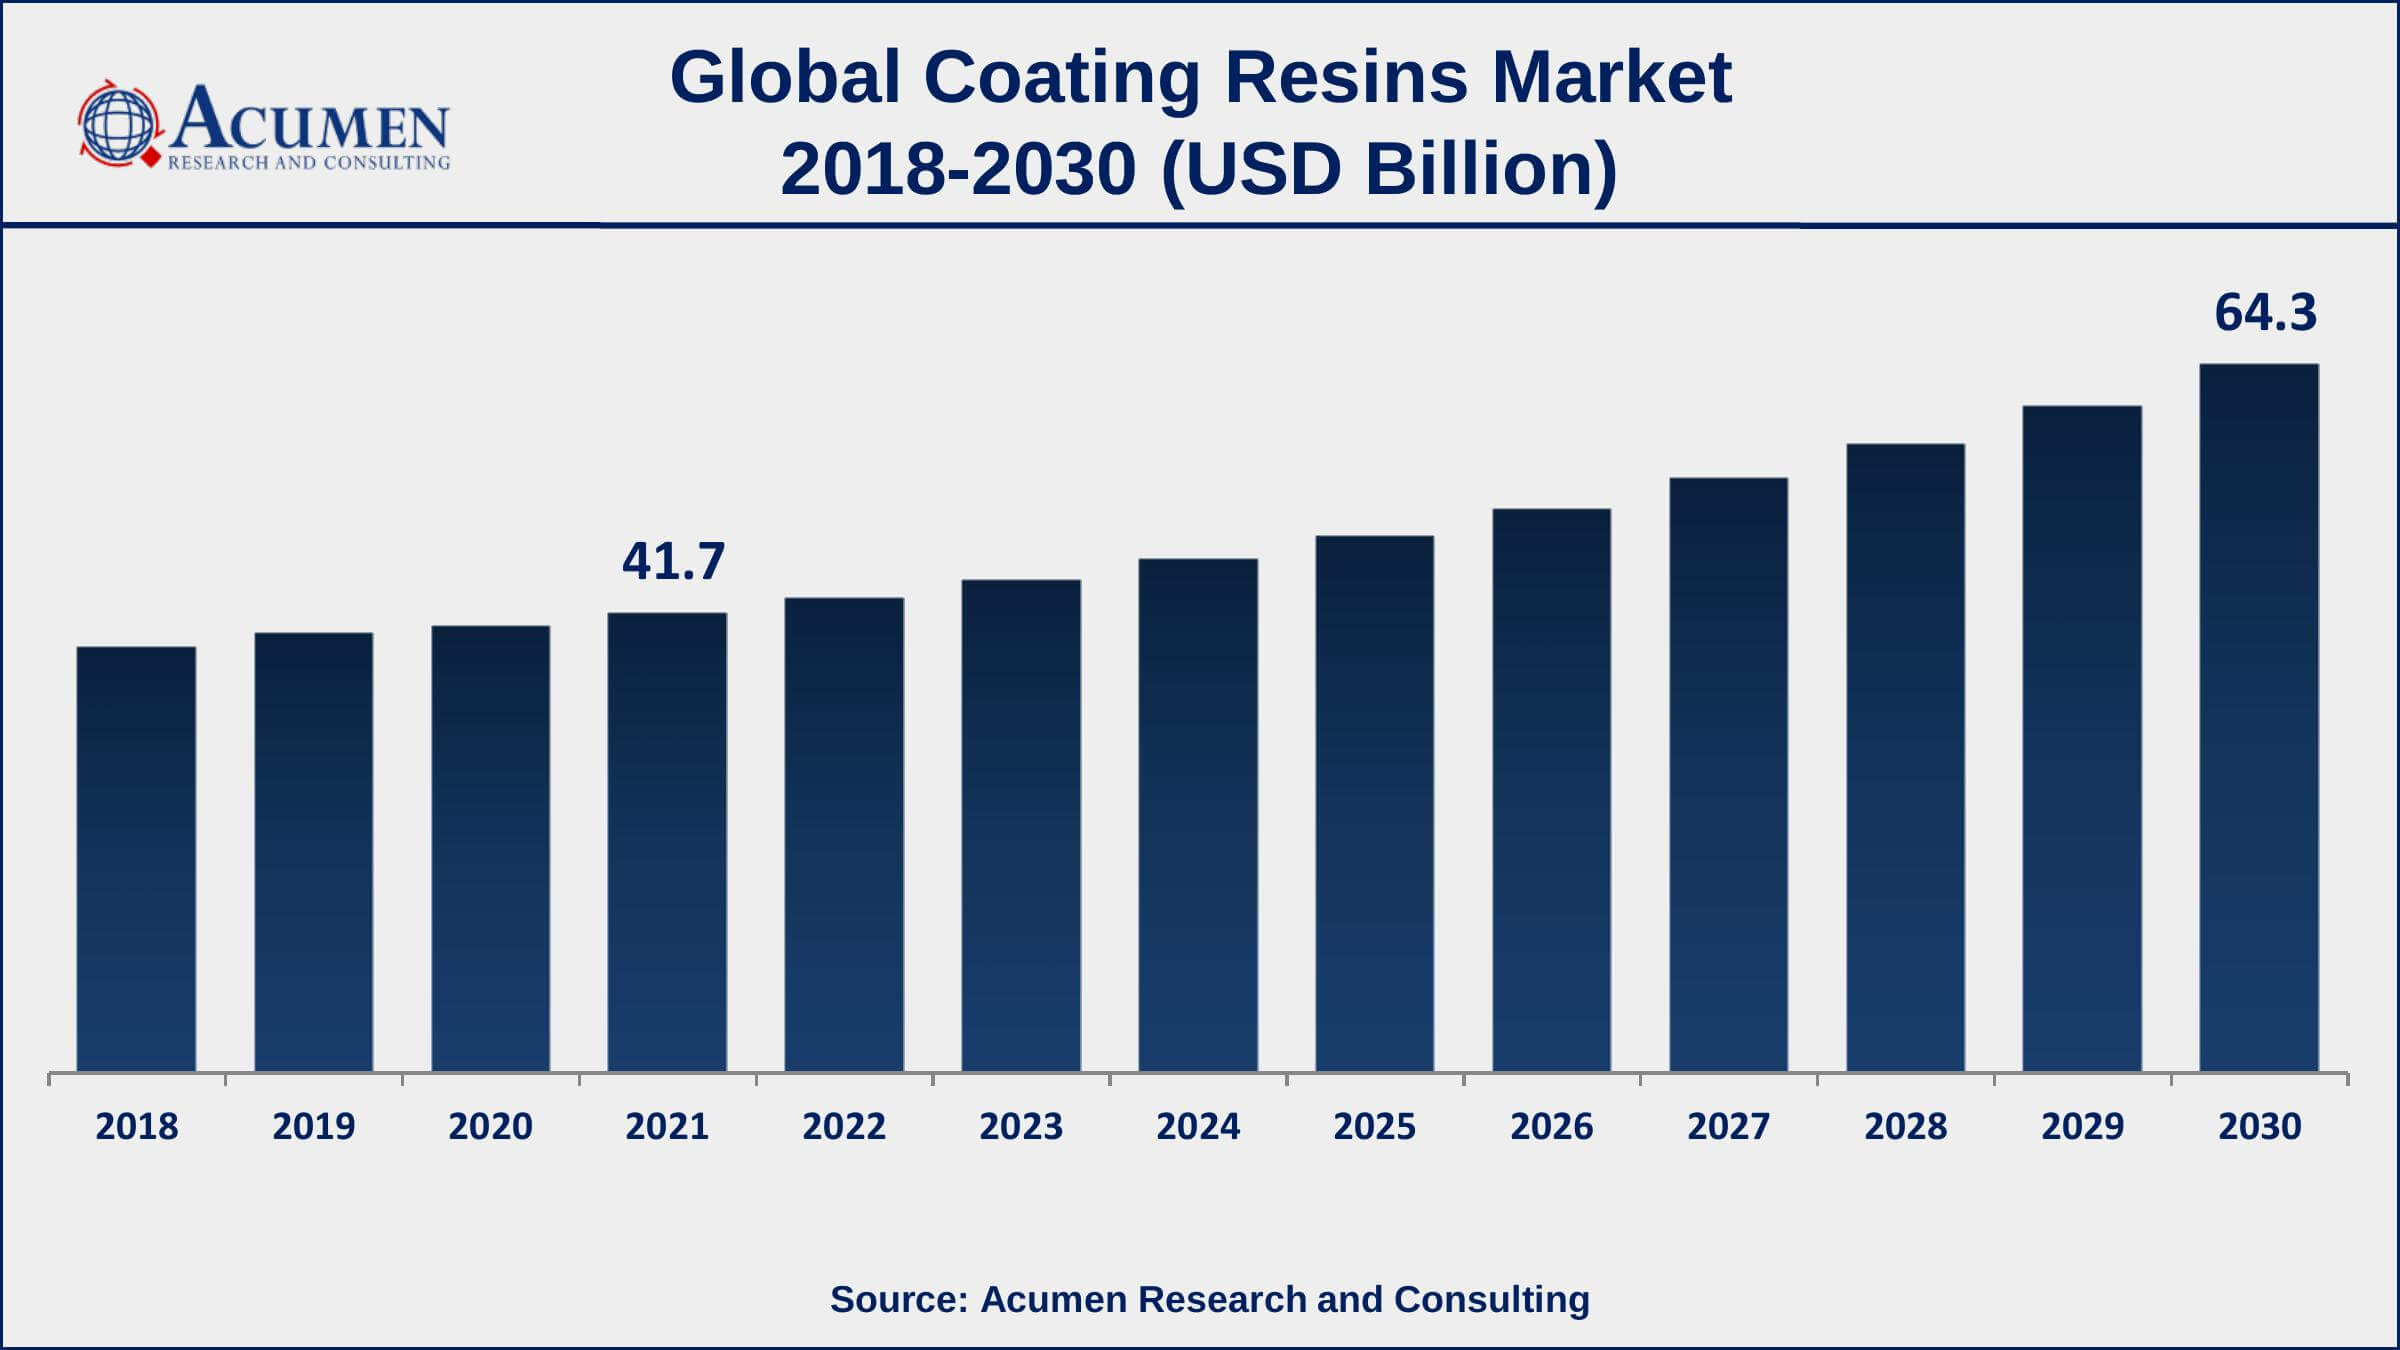 Asia-Pacific region led with more than 43% of coating resins market share in 2021